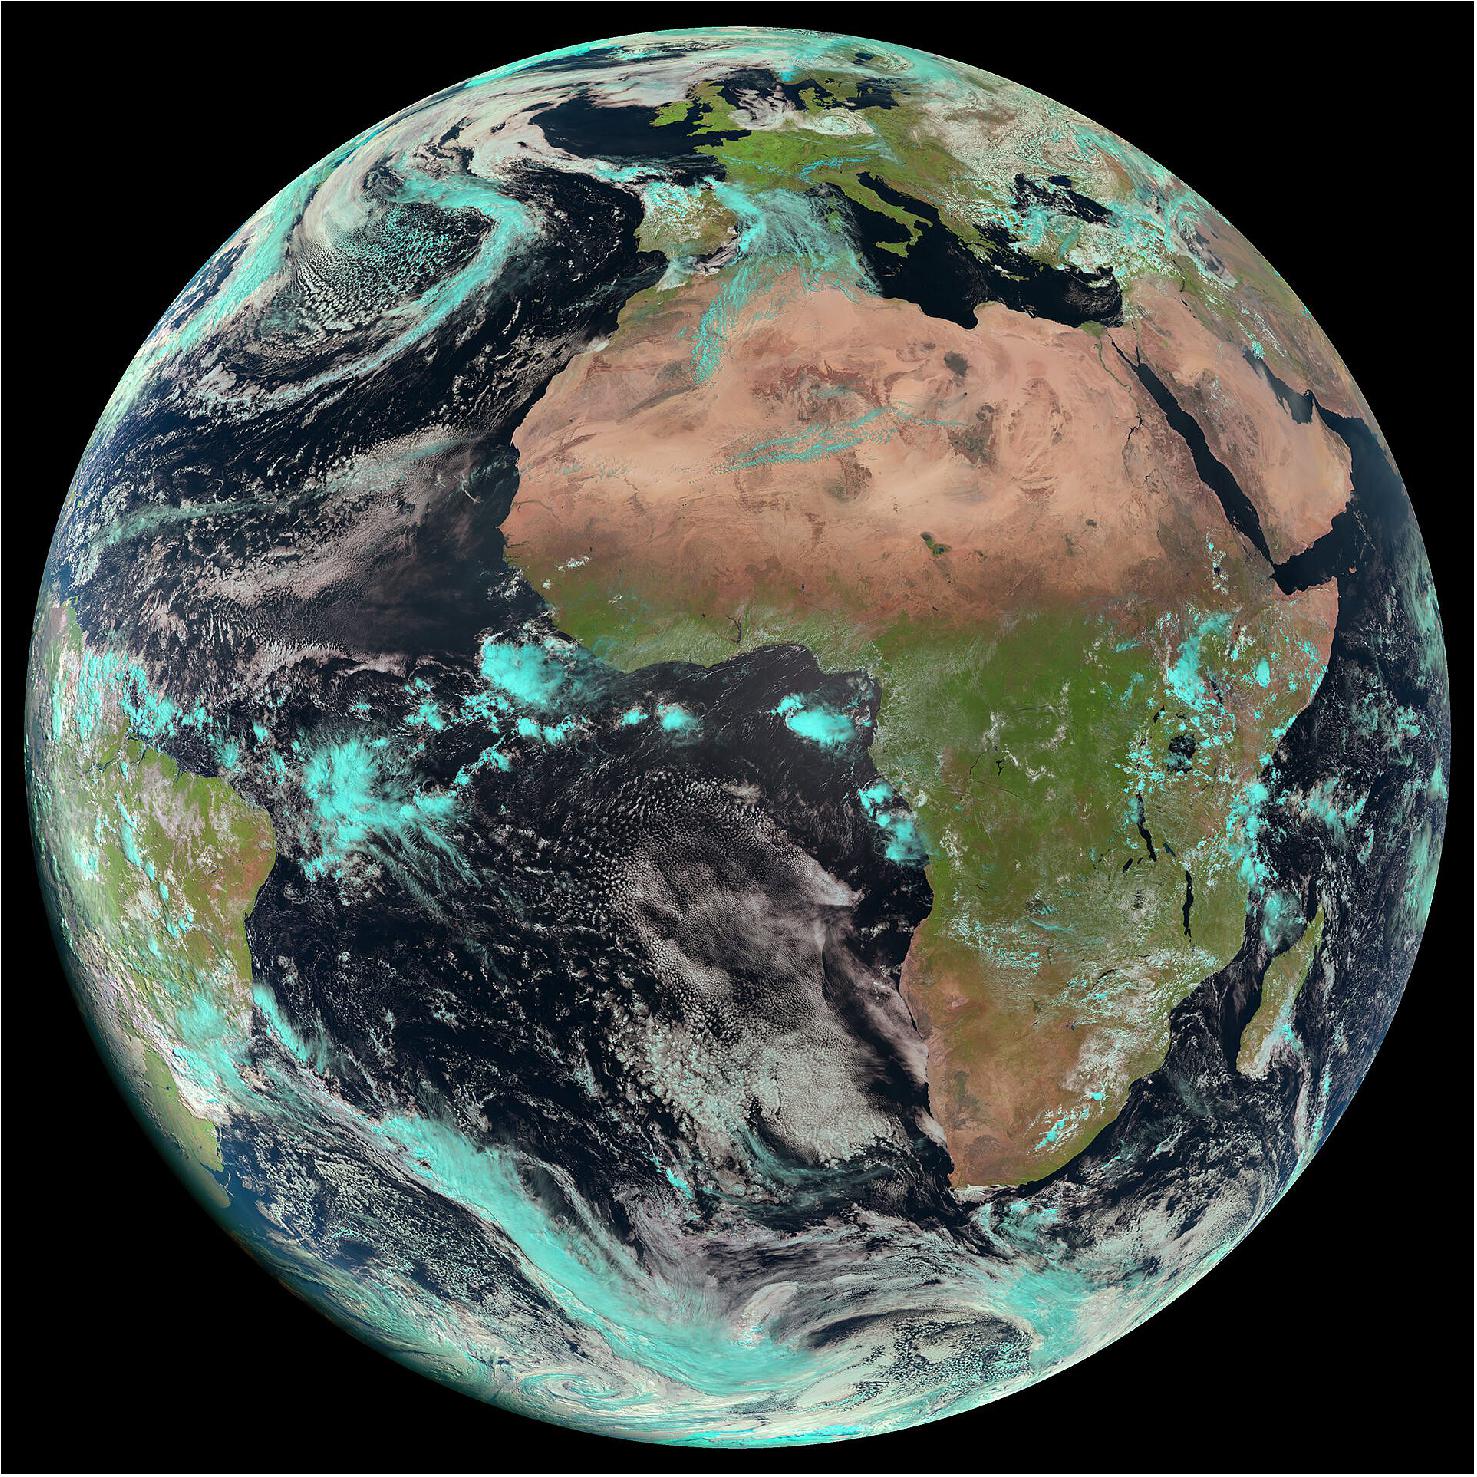 Figure 11: Earth seen by MeteoSat. This full-disc image of Earth was acquired by the Spinning Enhanced Visible and Infrared Imager (SEVIRI) instrument on MSG-3 (MeteoSat Second Generation-3, now MeteoSat-10 in operation) on 22 April 2015 (image credit: EUMETSAT)